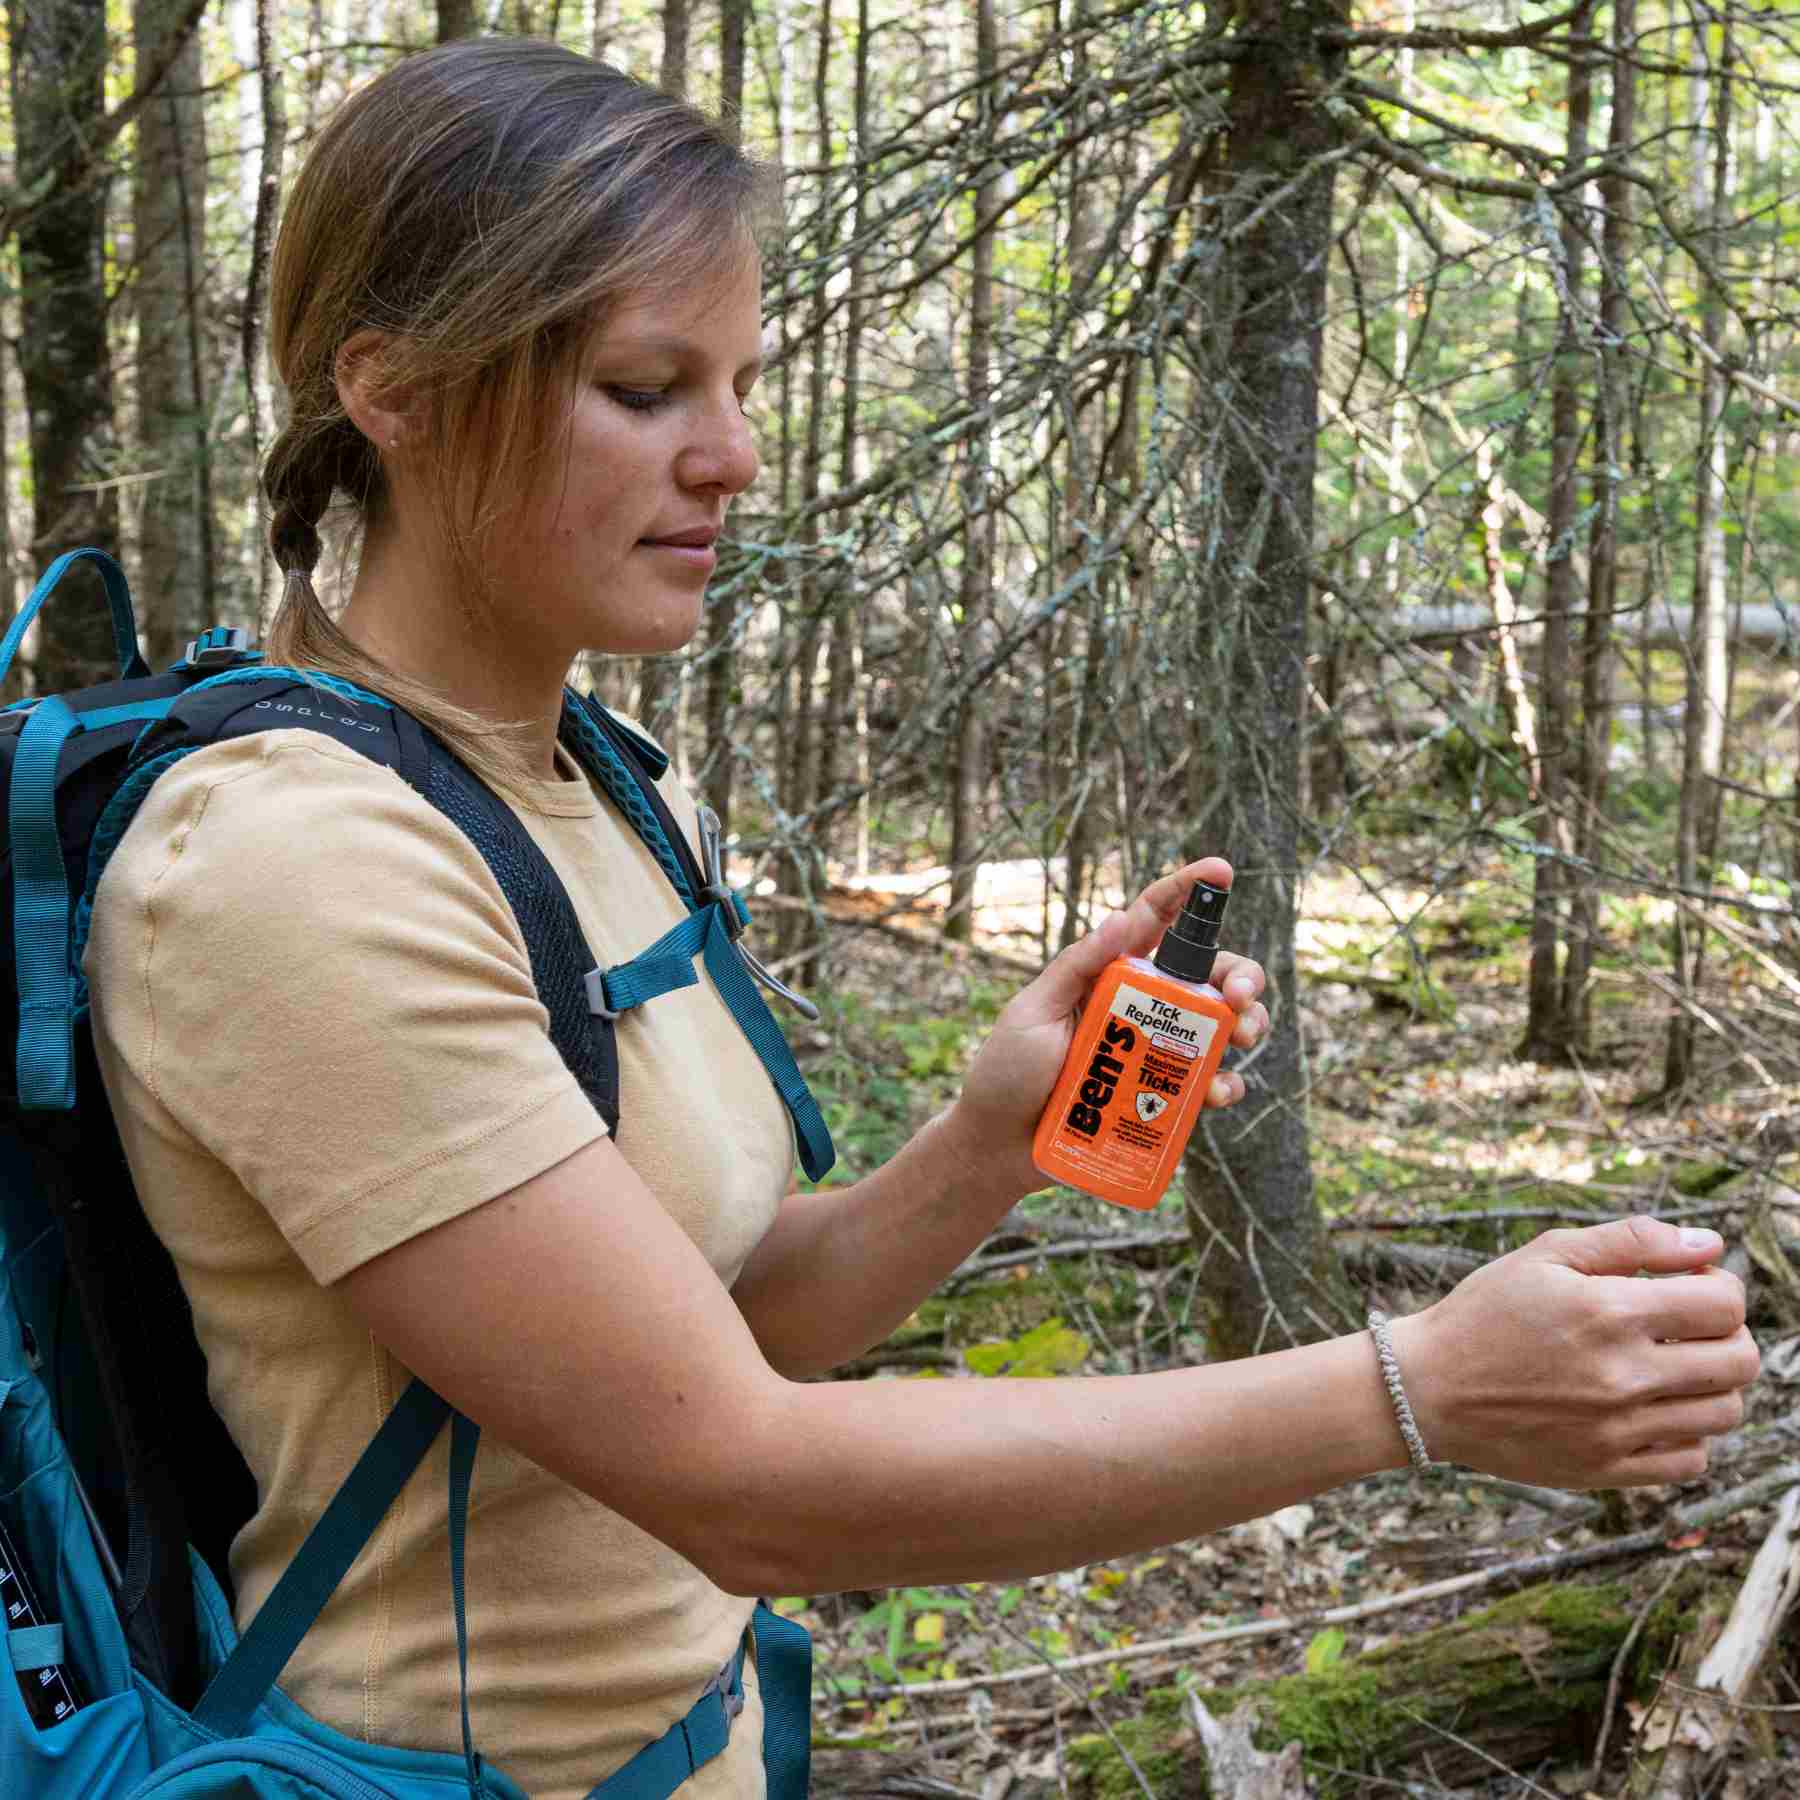 Woman using Ben's 3.4 oz Tick Repellent in woods with yellow shirt and blue backpack